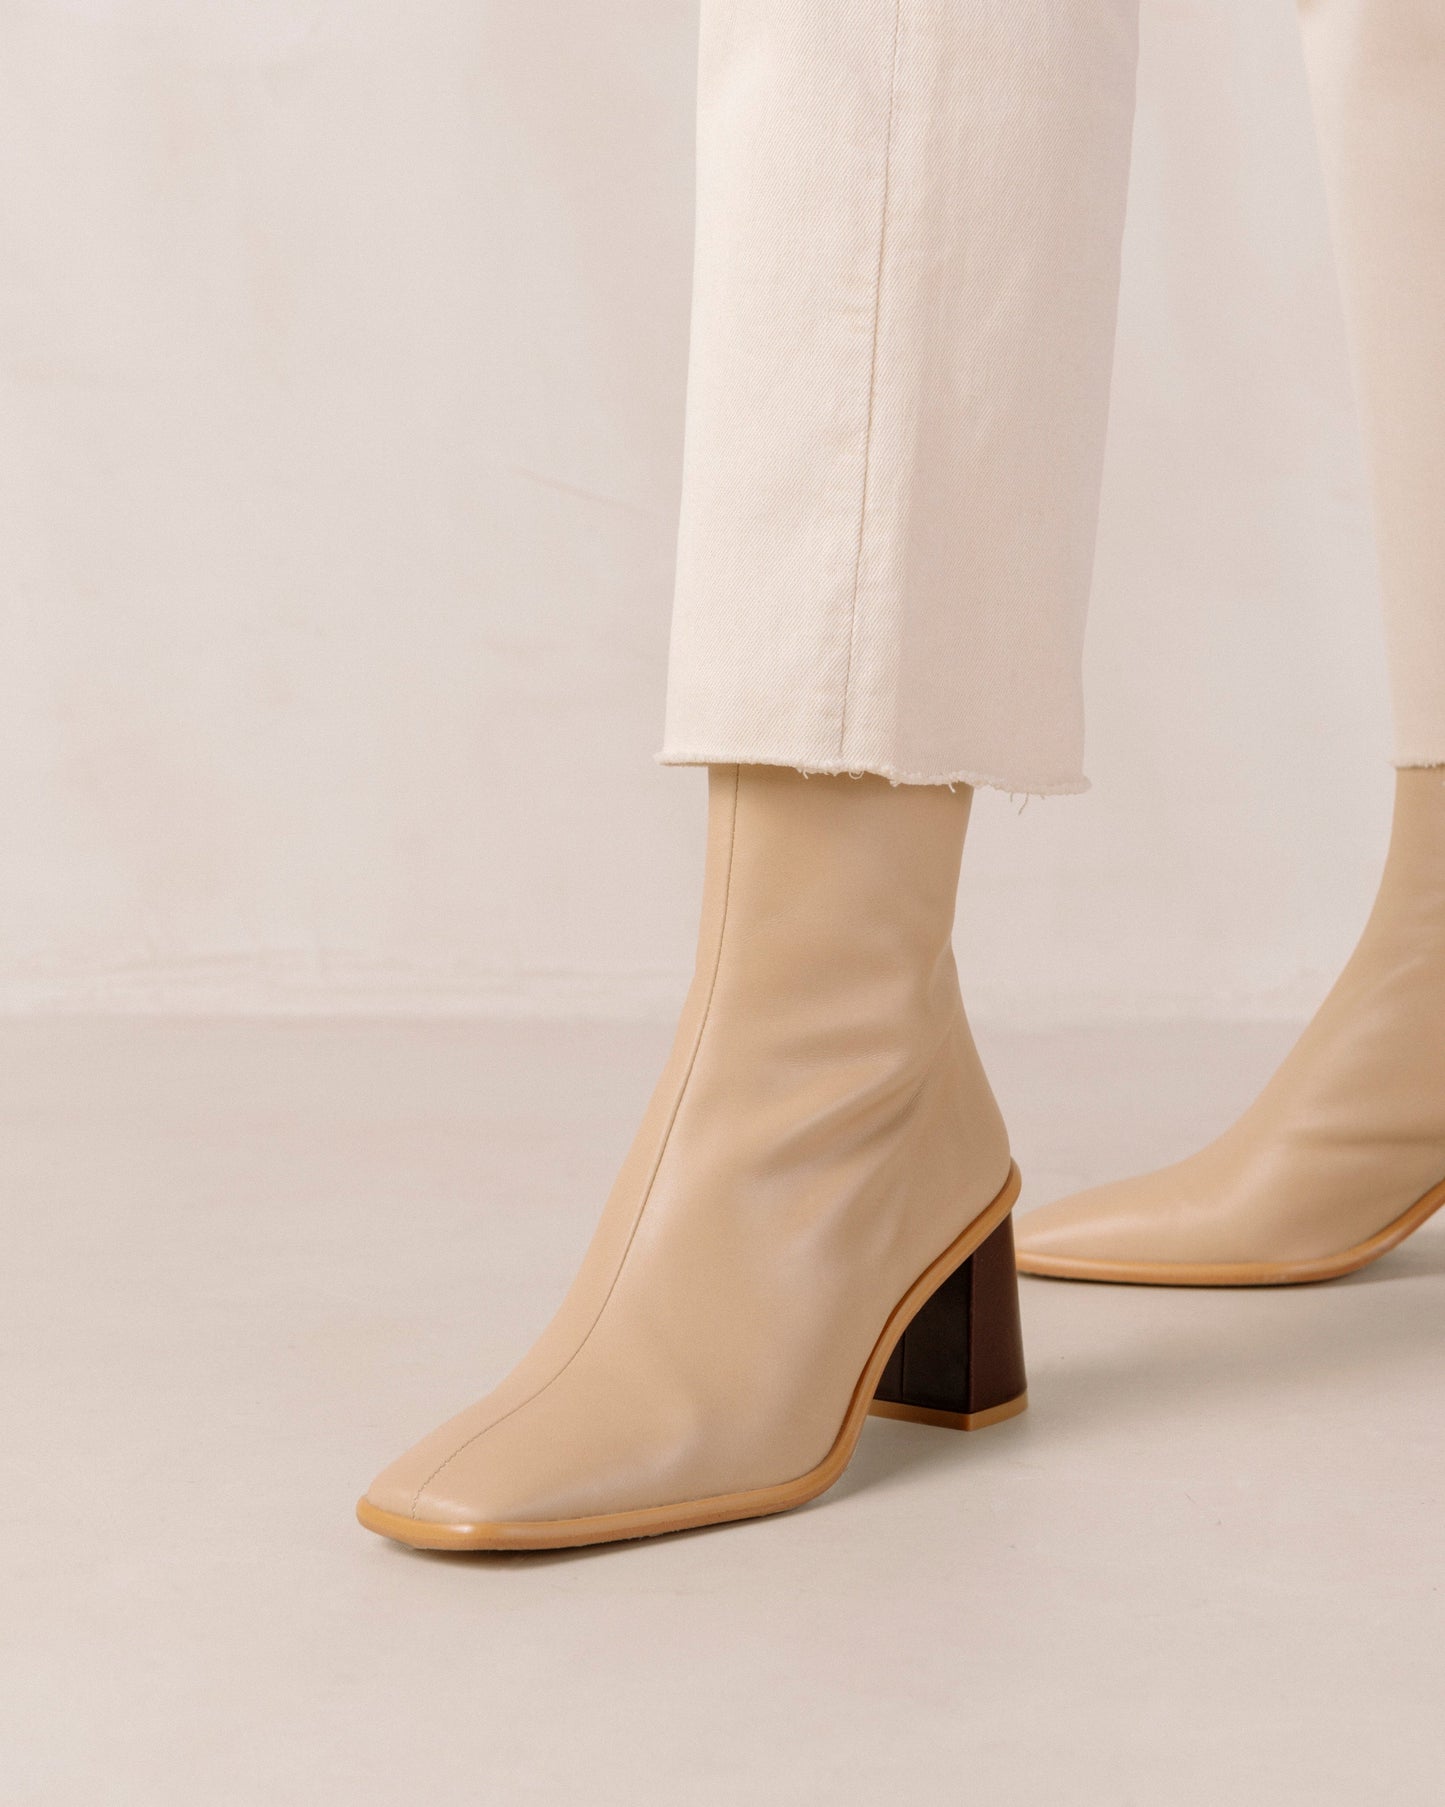 If you don’t know where to go, go West. These sustainable beige boots set atop a contrast block heel, with a slim line silhouette. Defined by their stone wash & square toe, these leather ankle booties also have inward facing zippers for extra comfort and feature a flattering, slim fit.